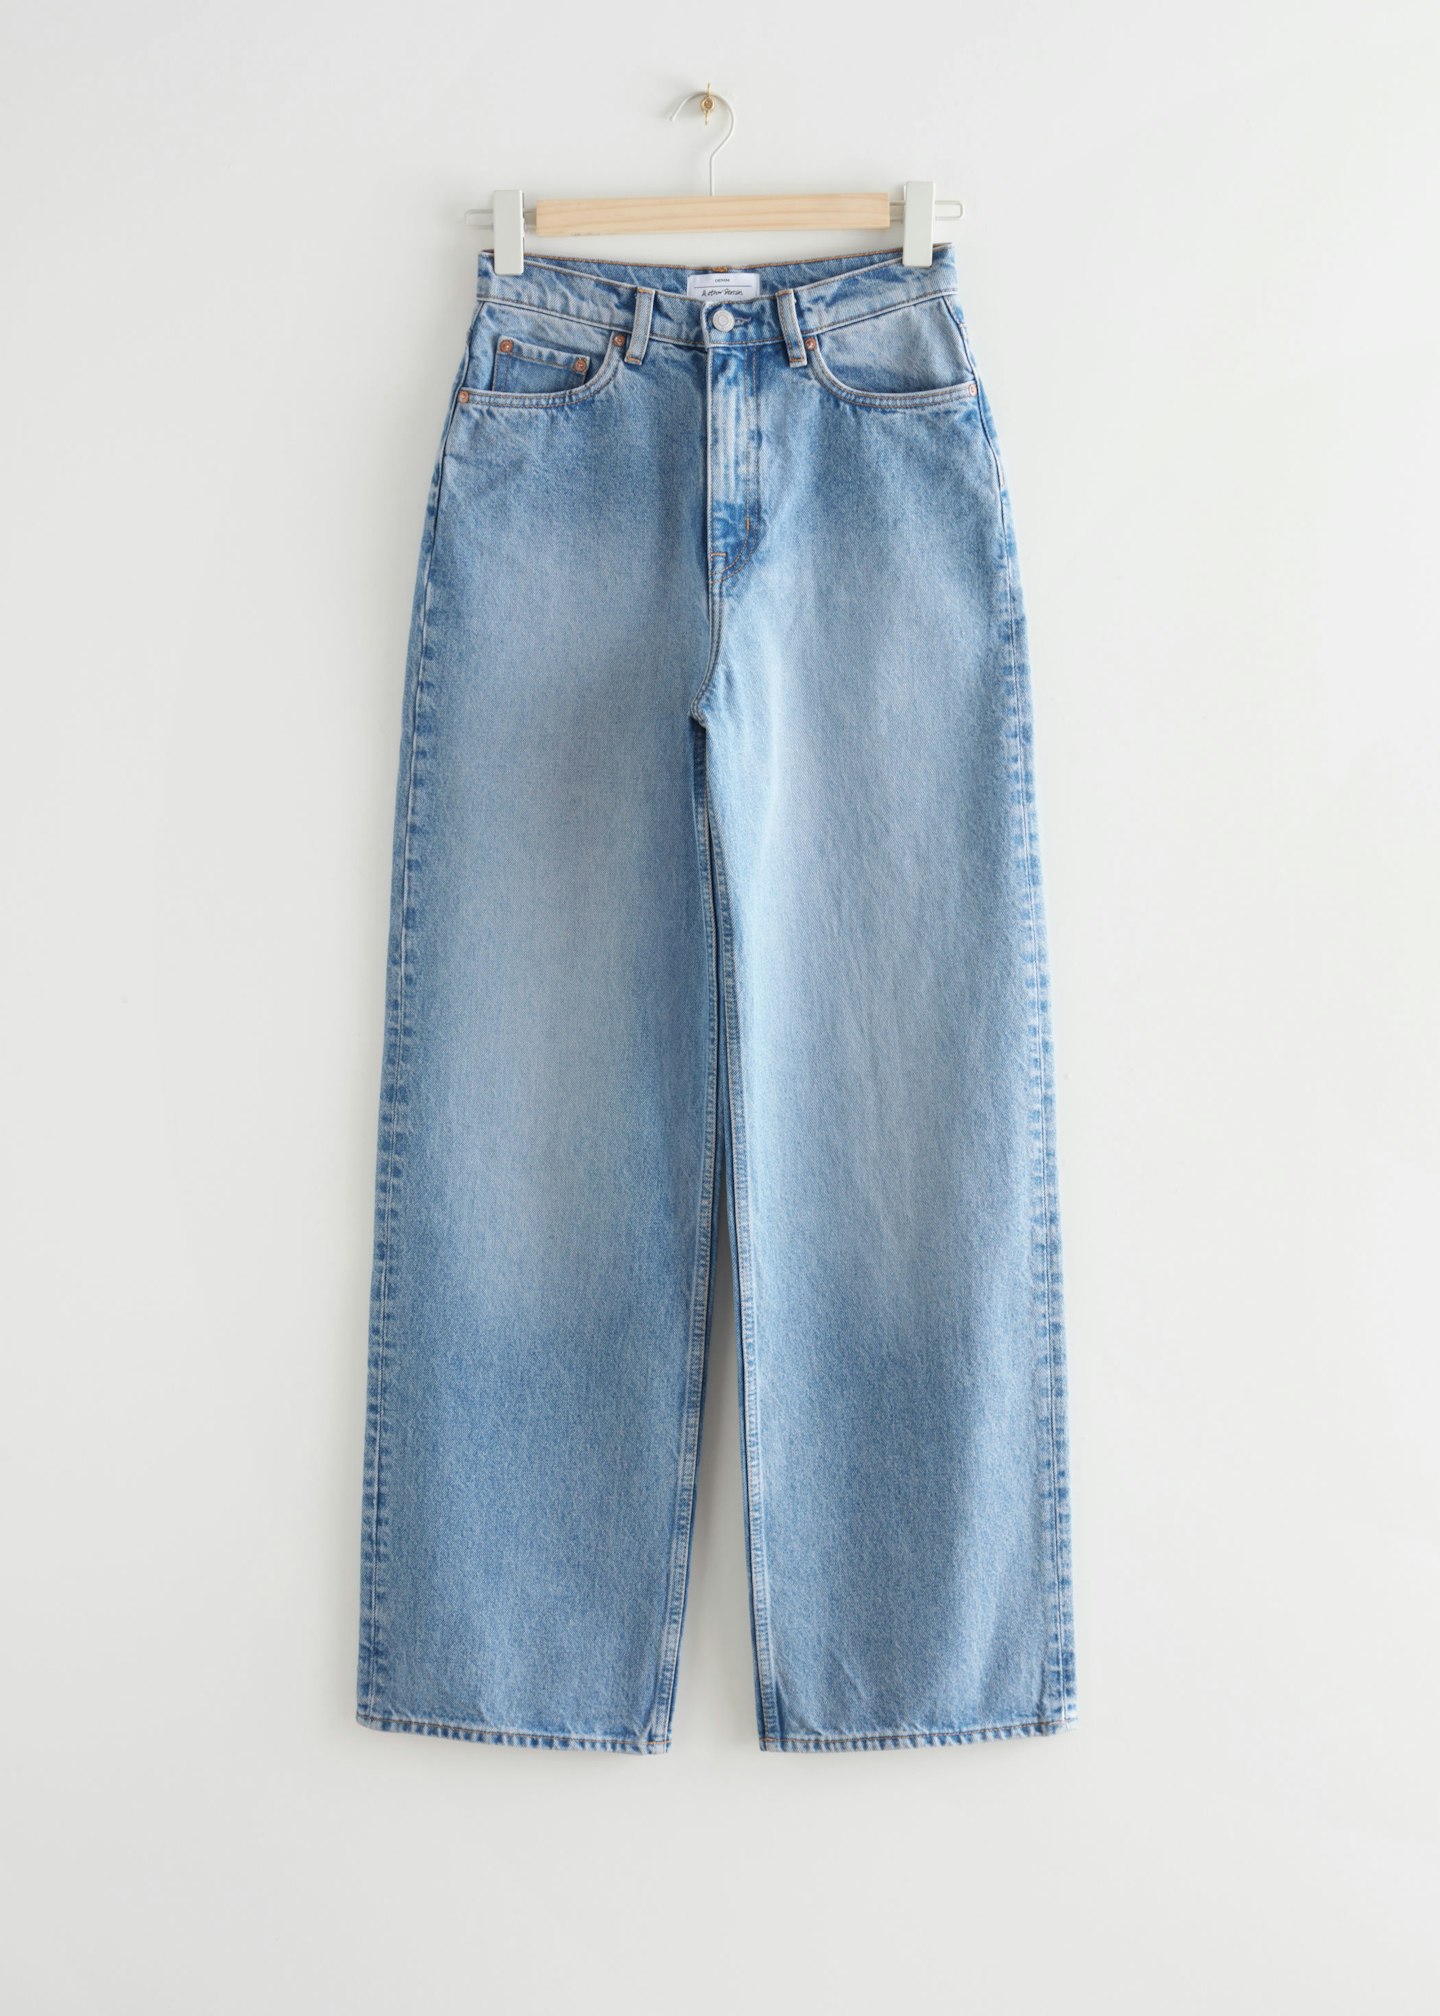 & Other Stories, Organic Cotton Jeans, £75